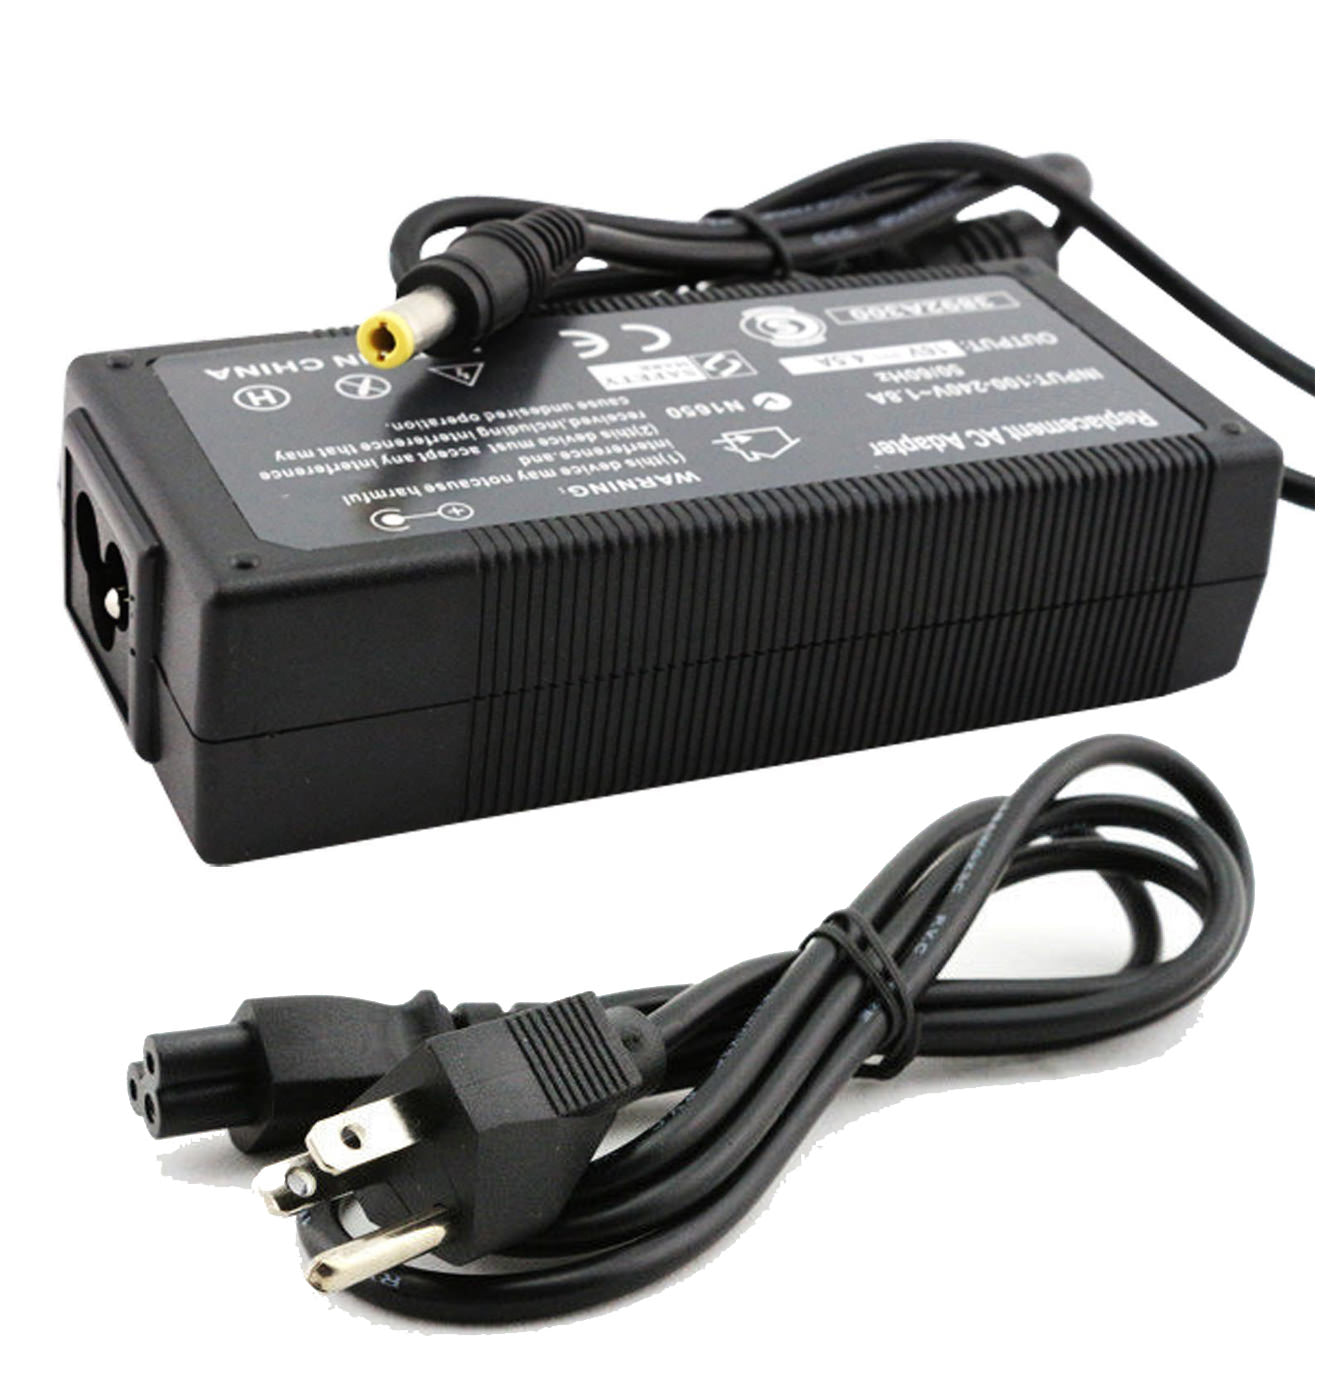 AC Adapter Charger for IBM ThinkPad T30 Notebook.